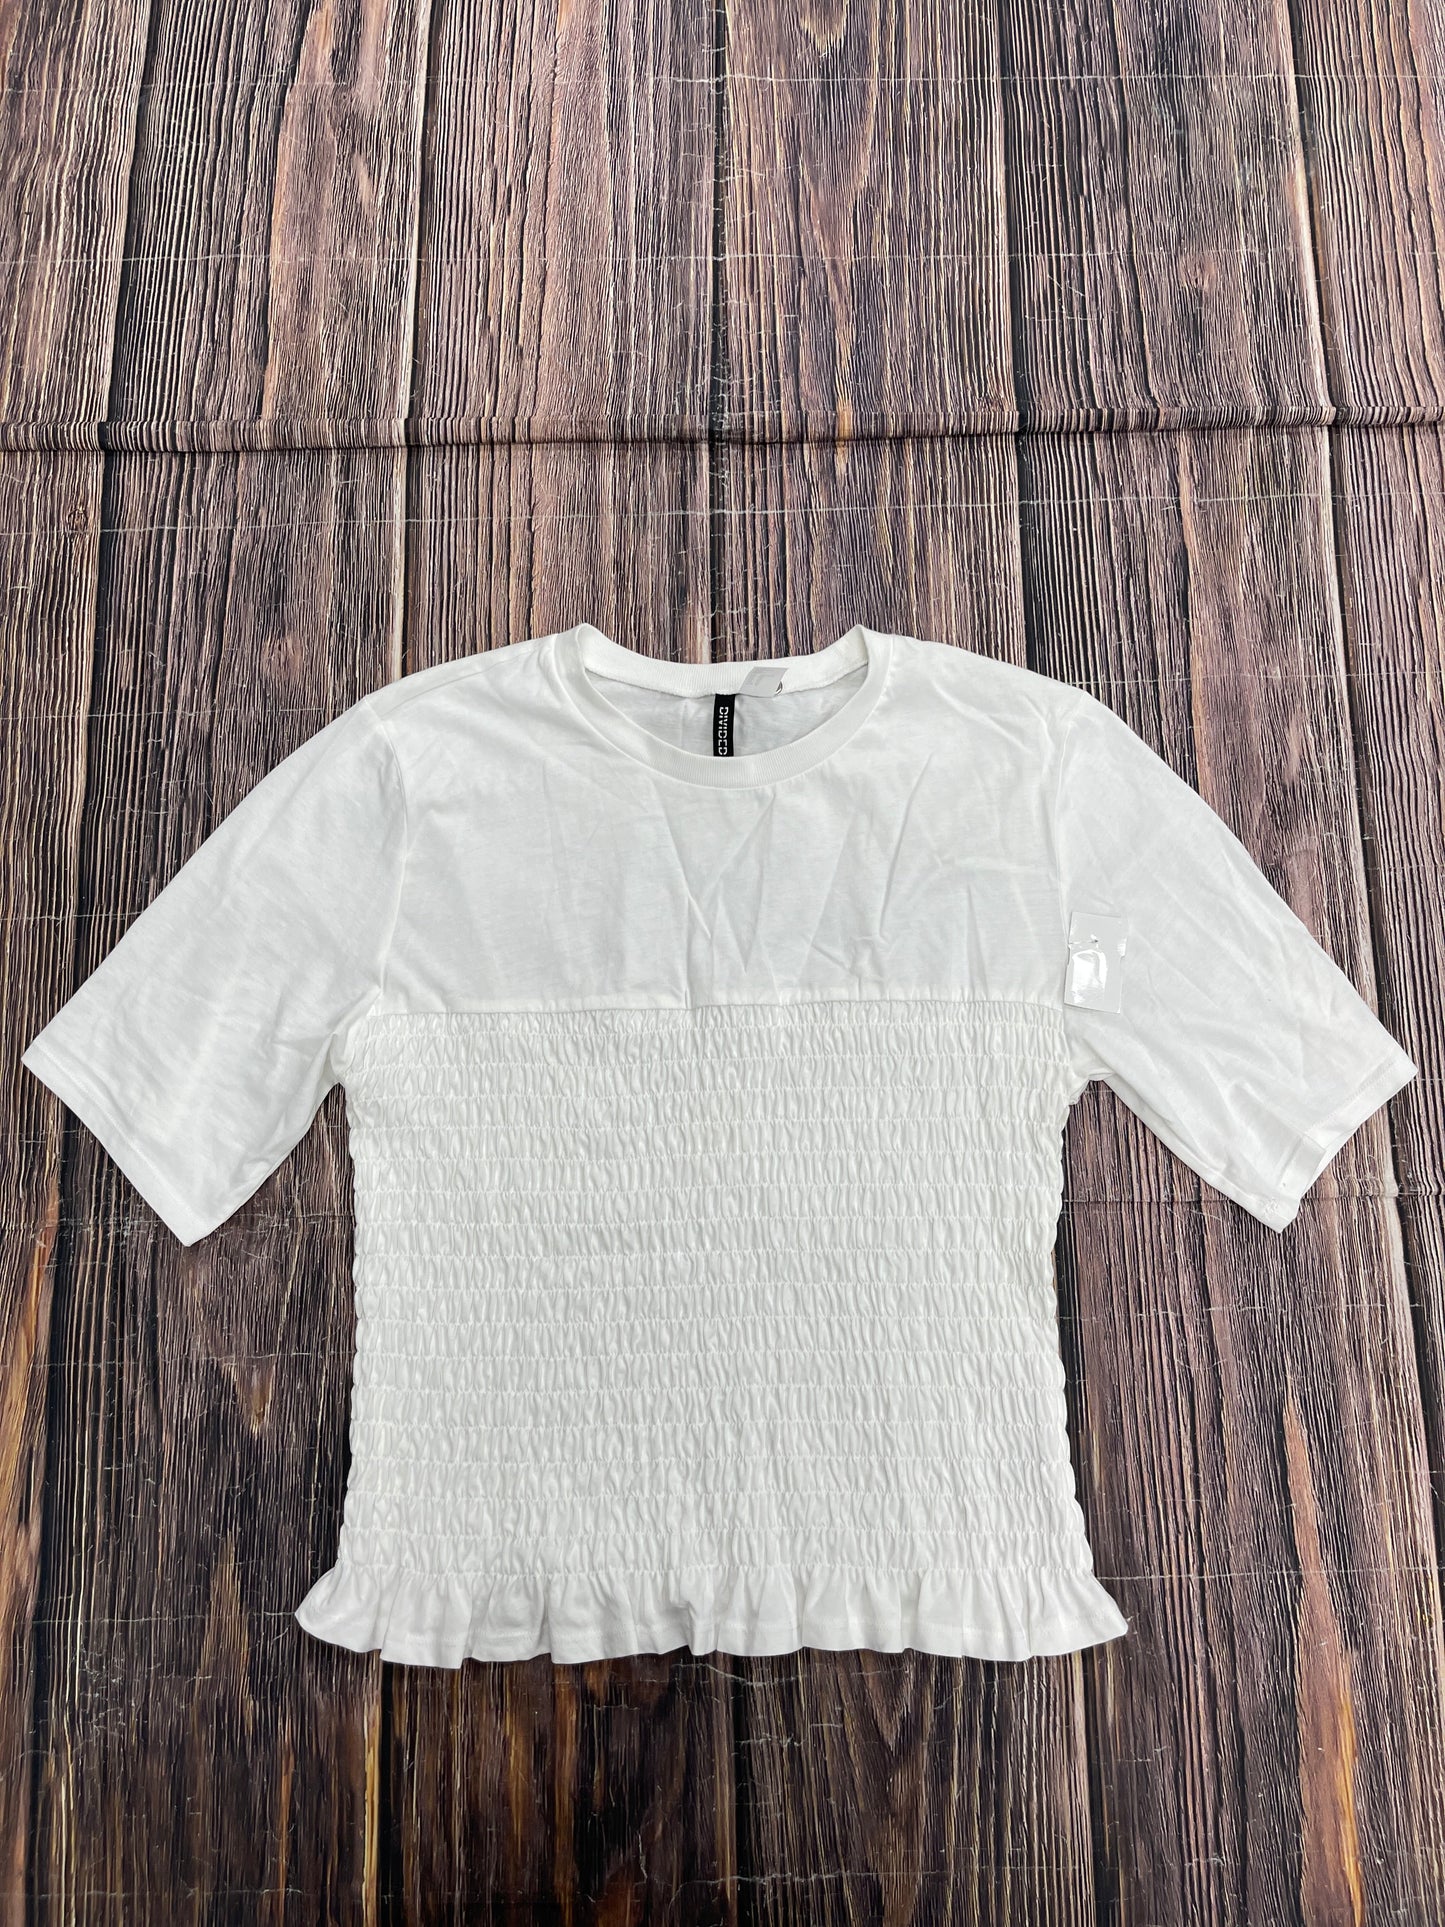 White Top Short Sleeve Divided, Size Xl